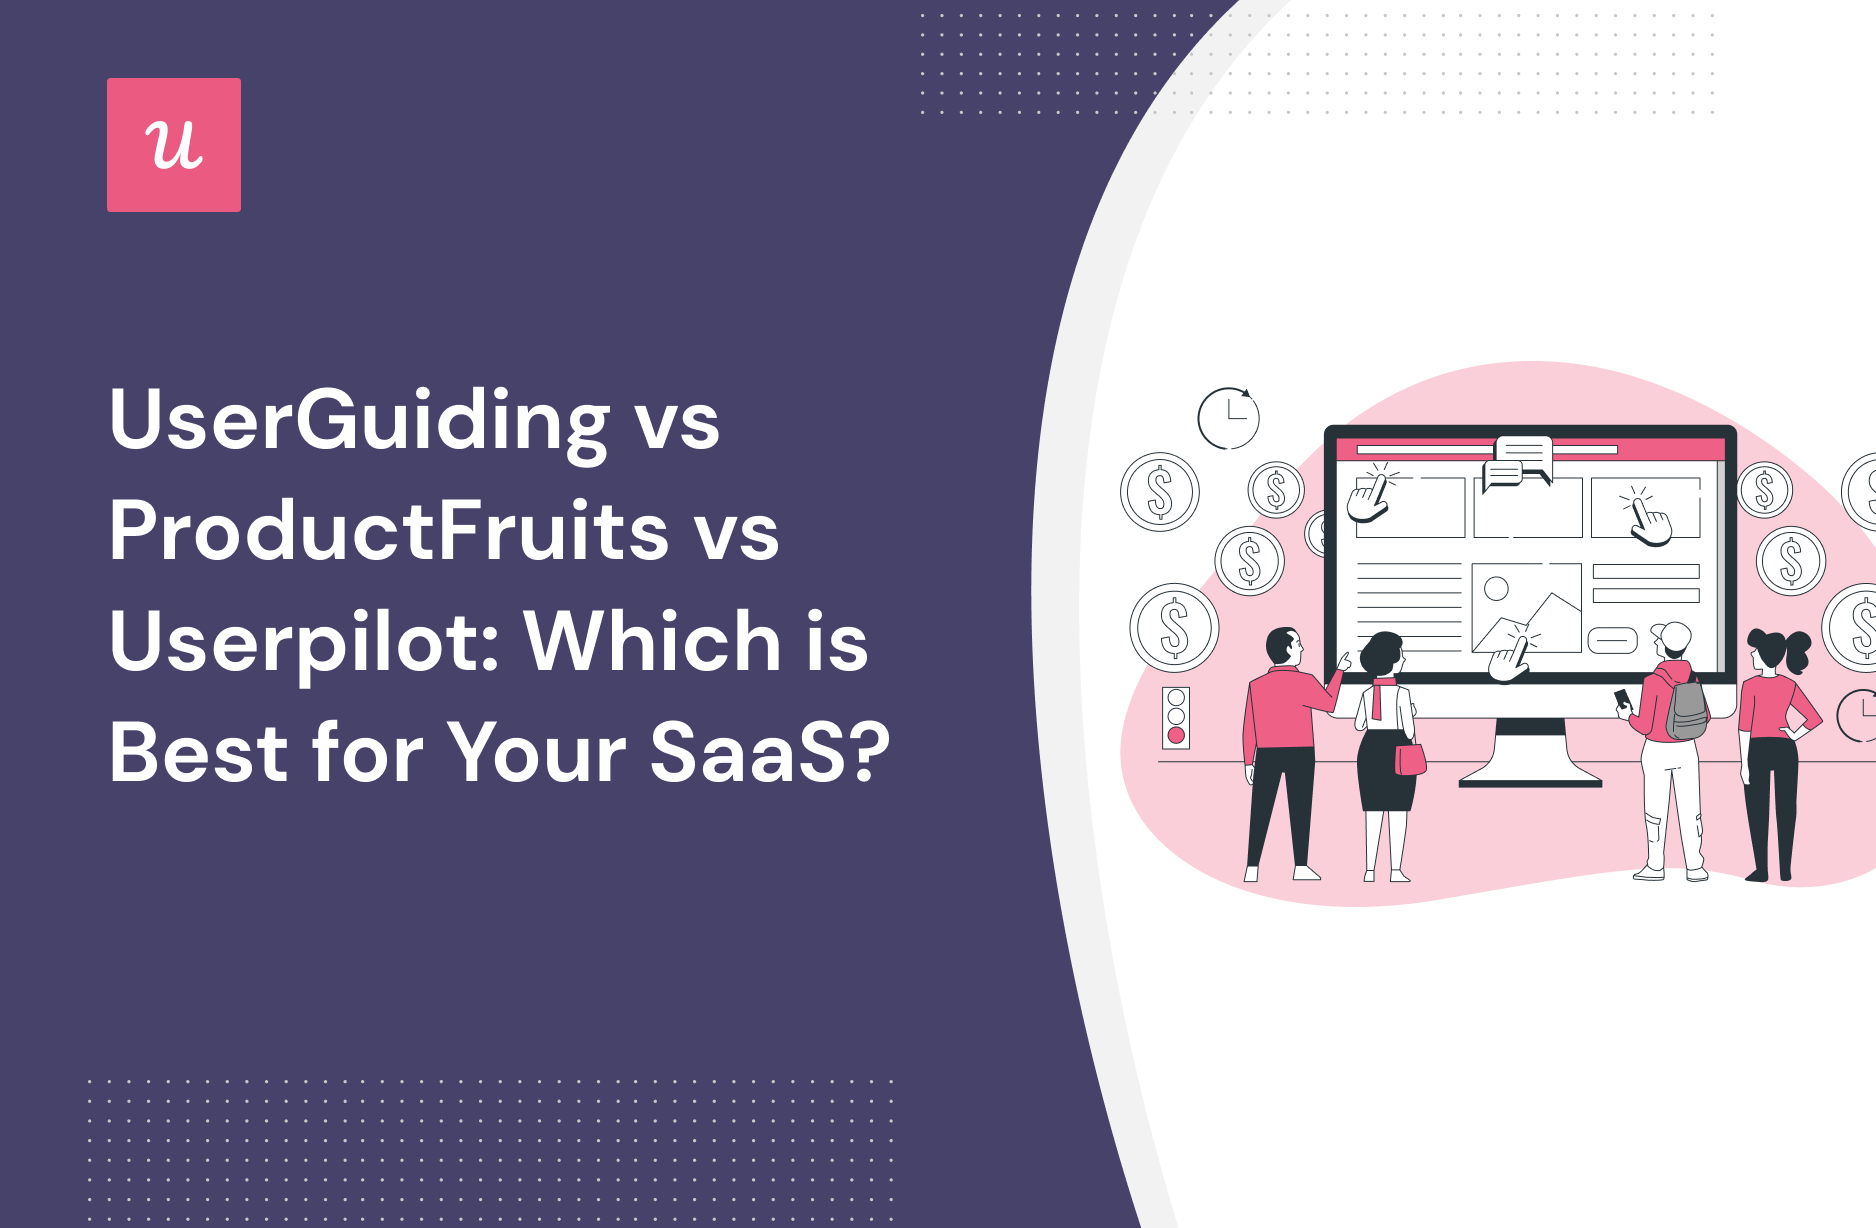 Userguiding vs ProductFruits vs Userpilot - which is best for your SaaS?